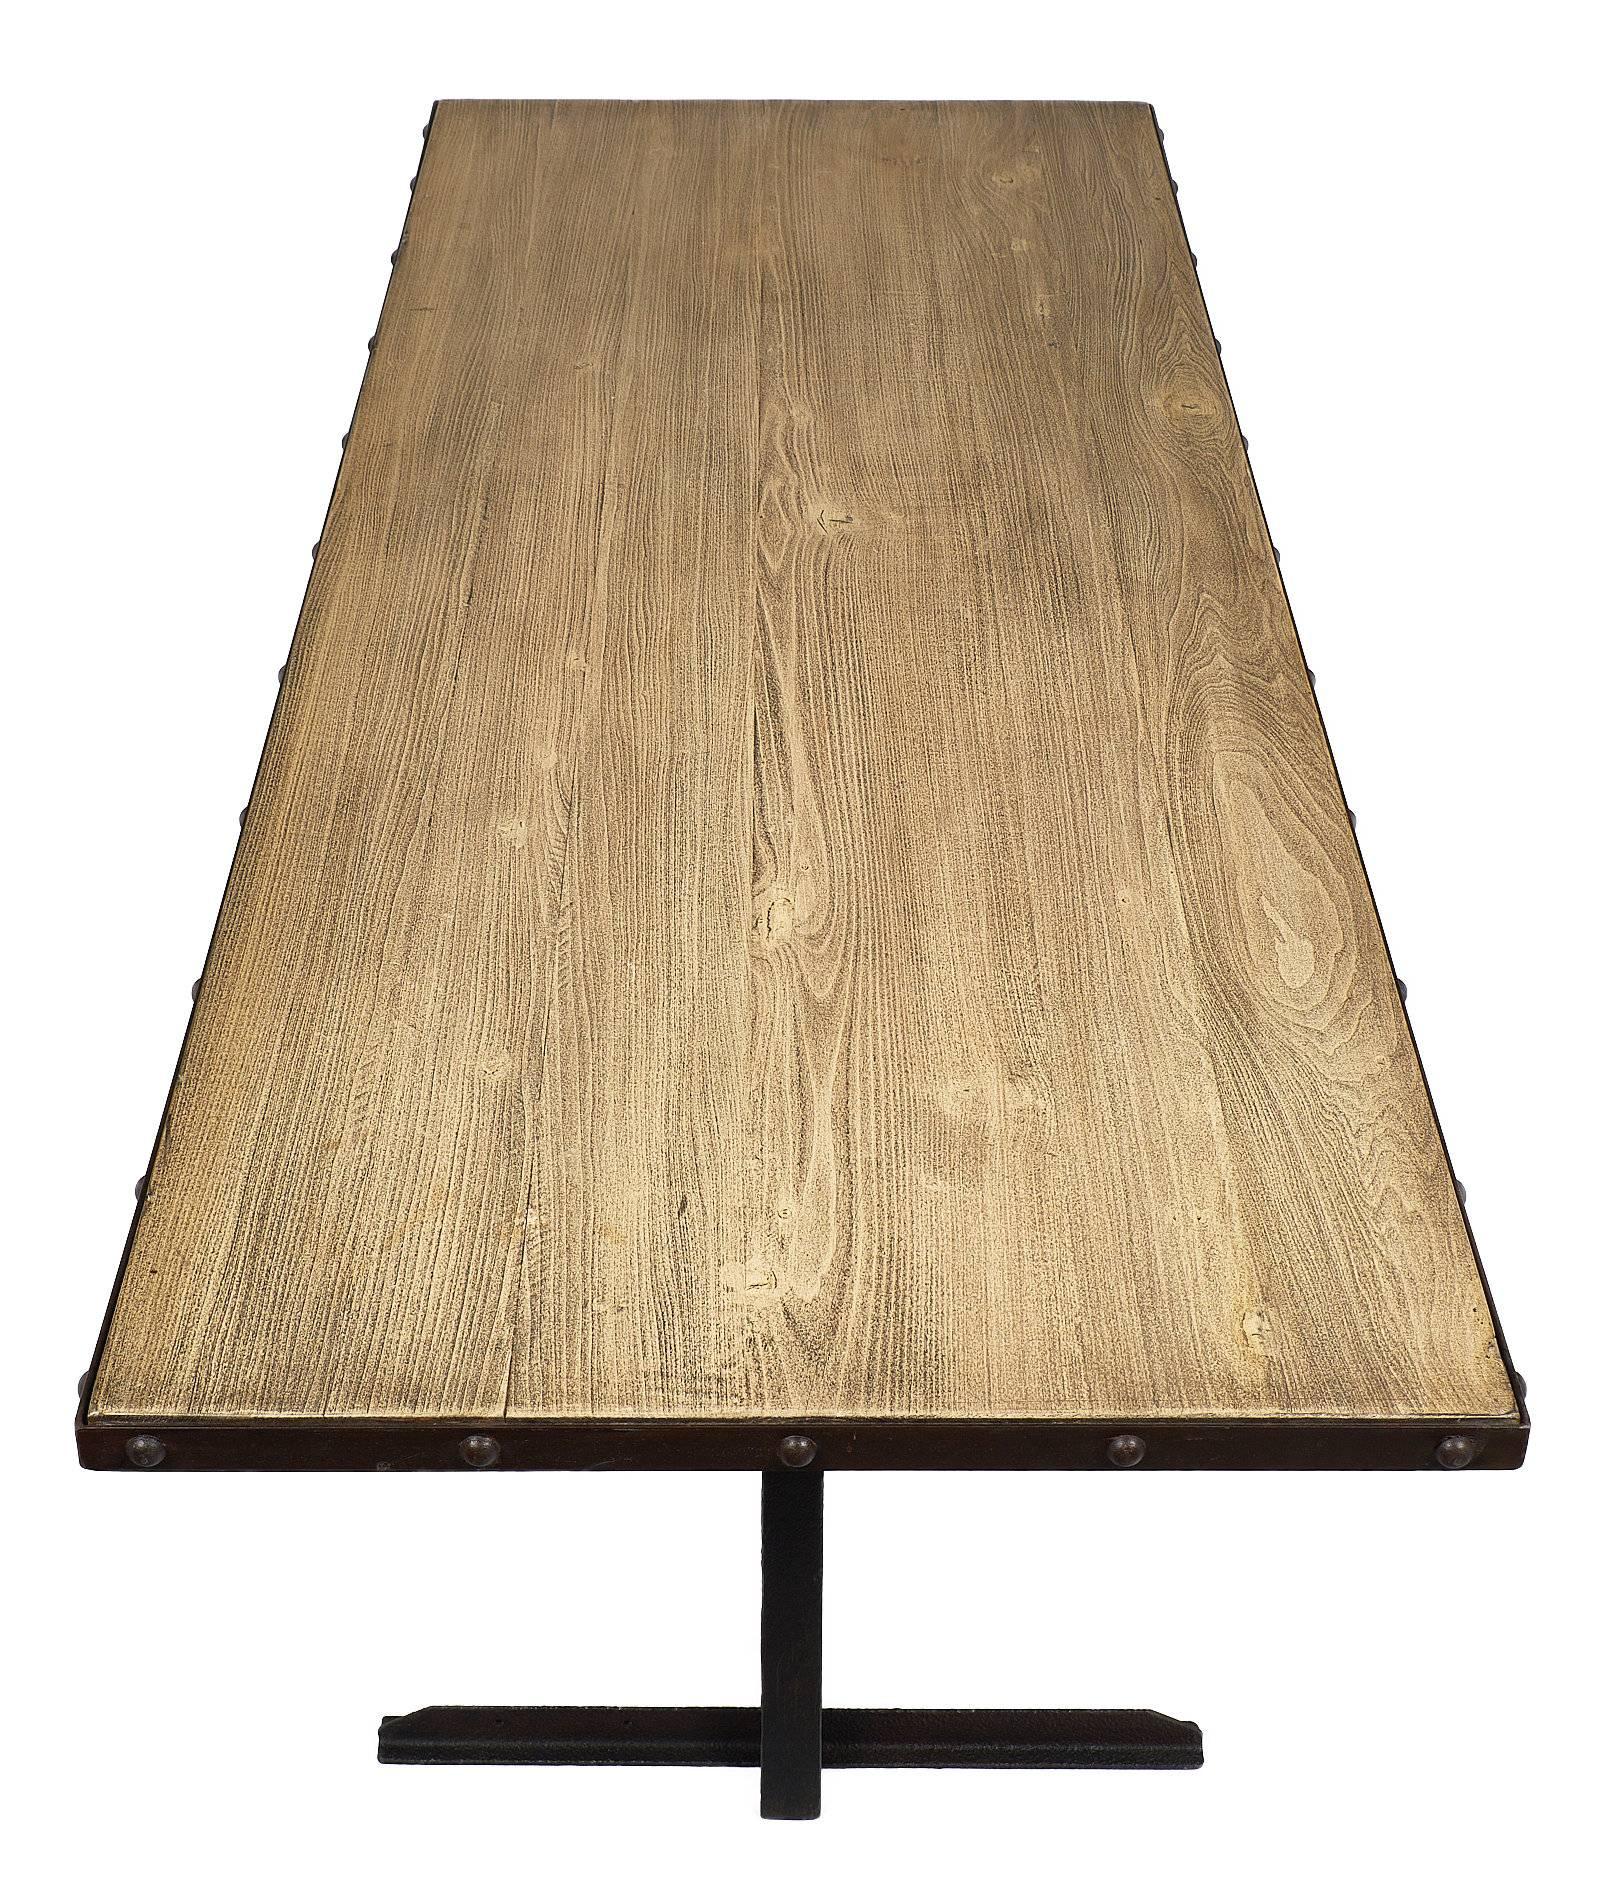 Cerused Wood Topped Industrial Dining Table In Excellent Condition For Sale In Austin, TX